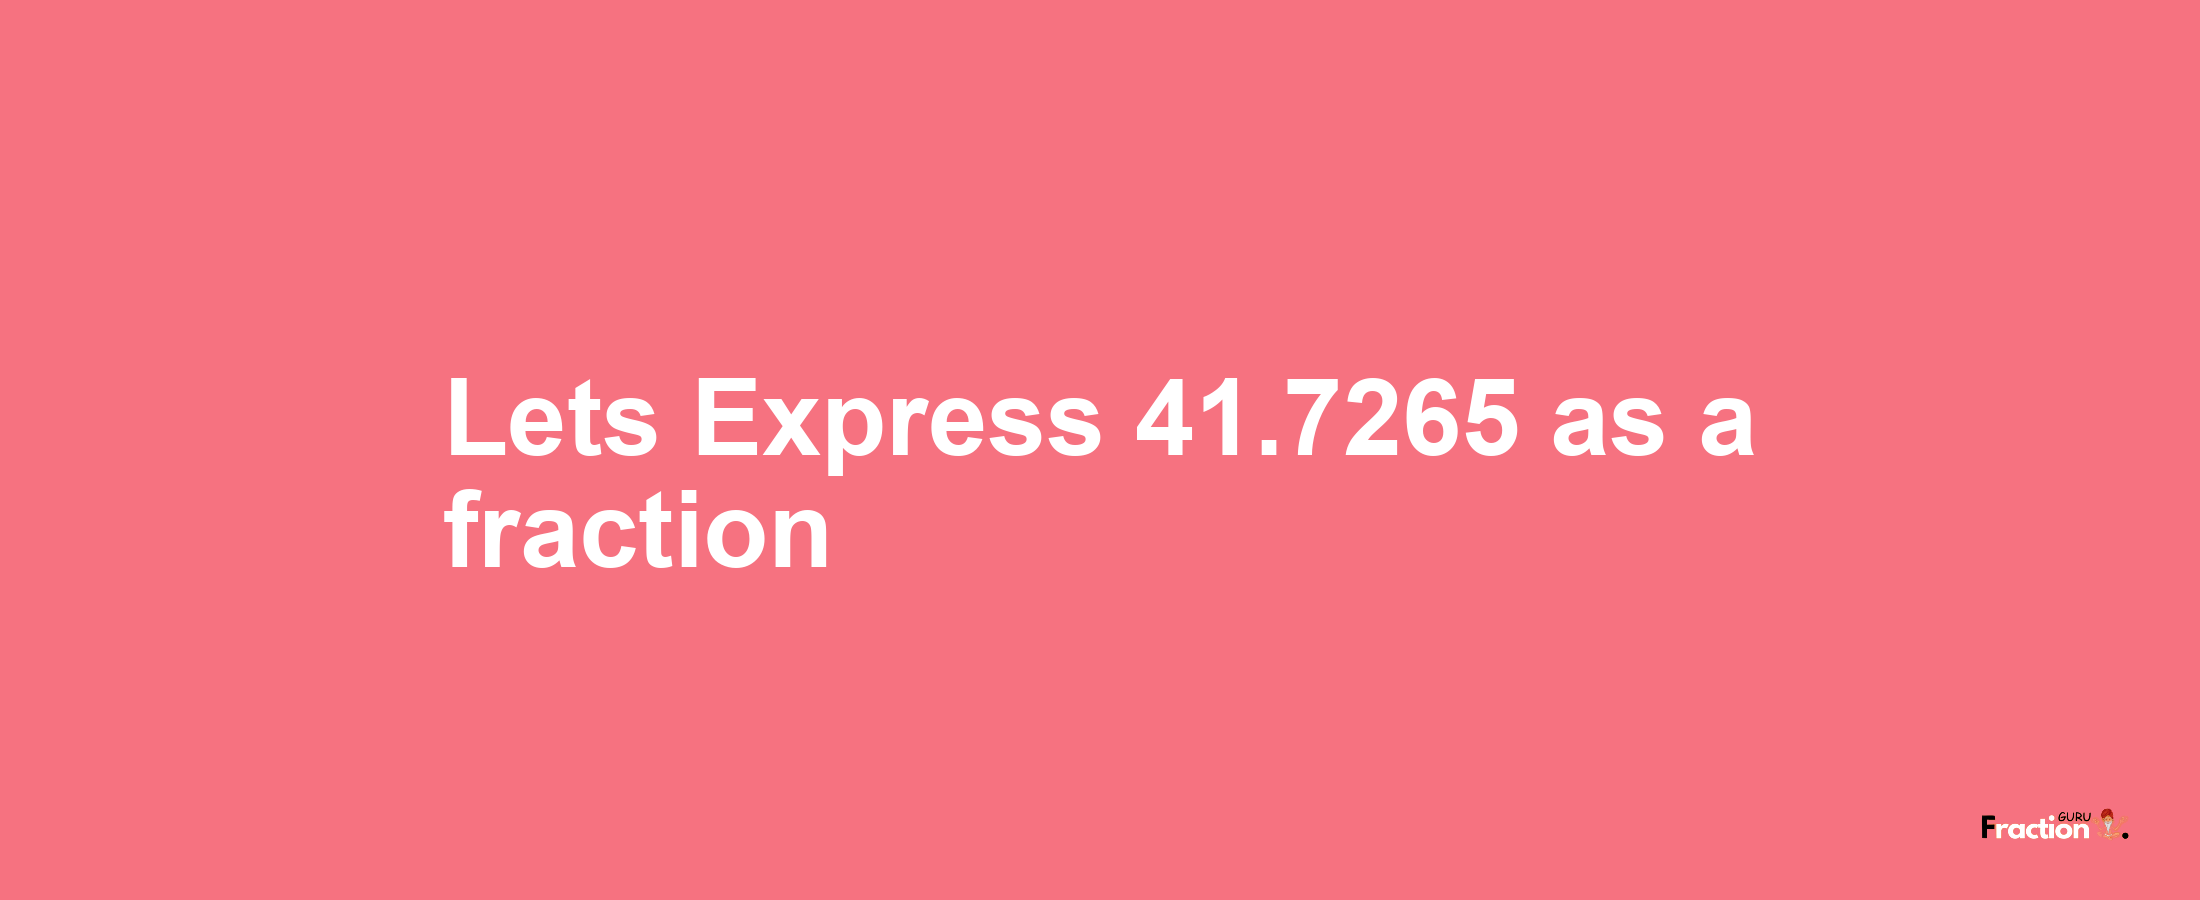 Lets Express 41.7265 as afraction